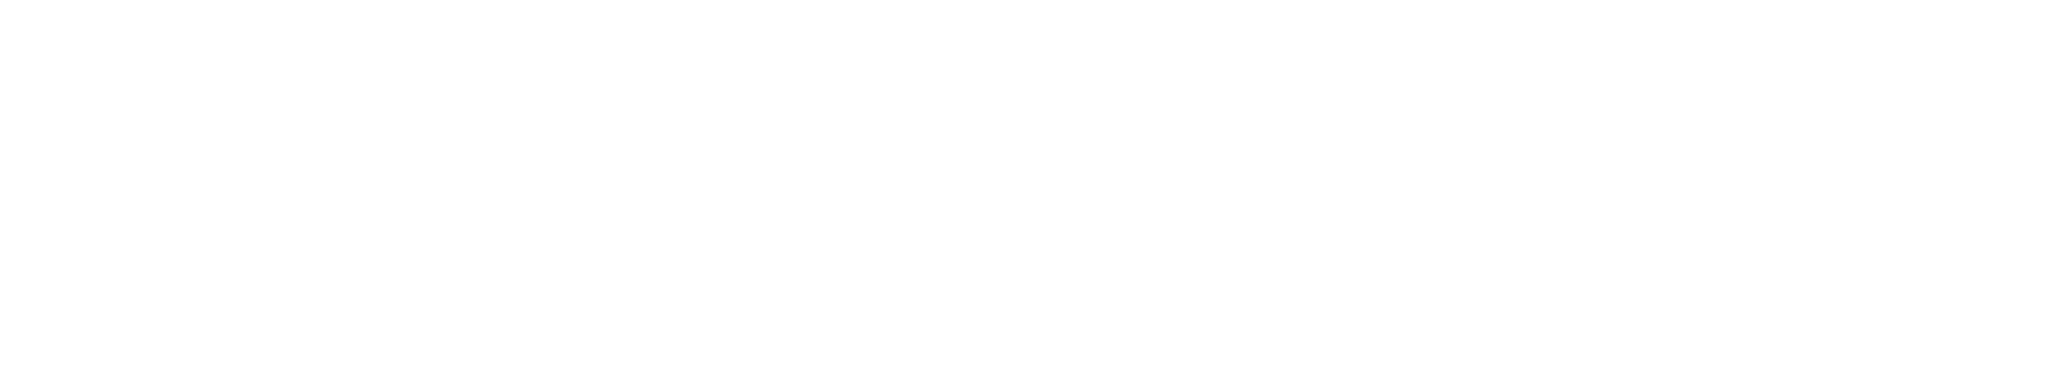 NSW Government and Australia Council for the Arts logos